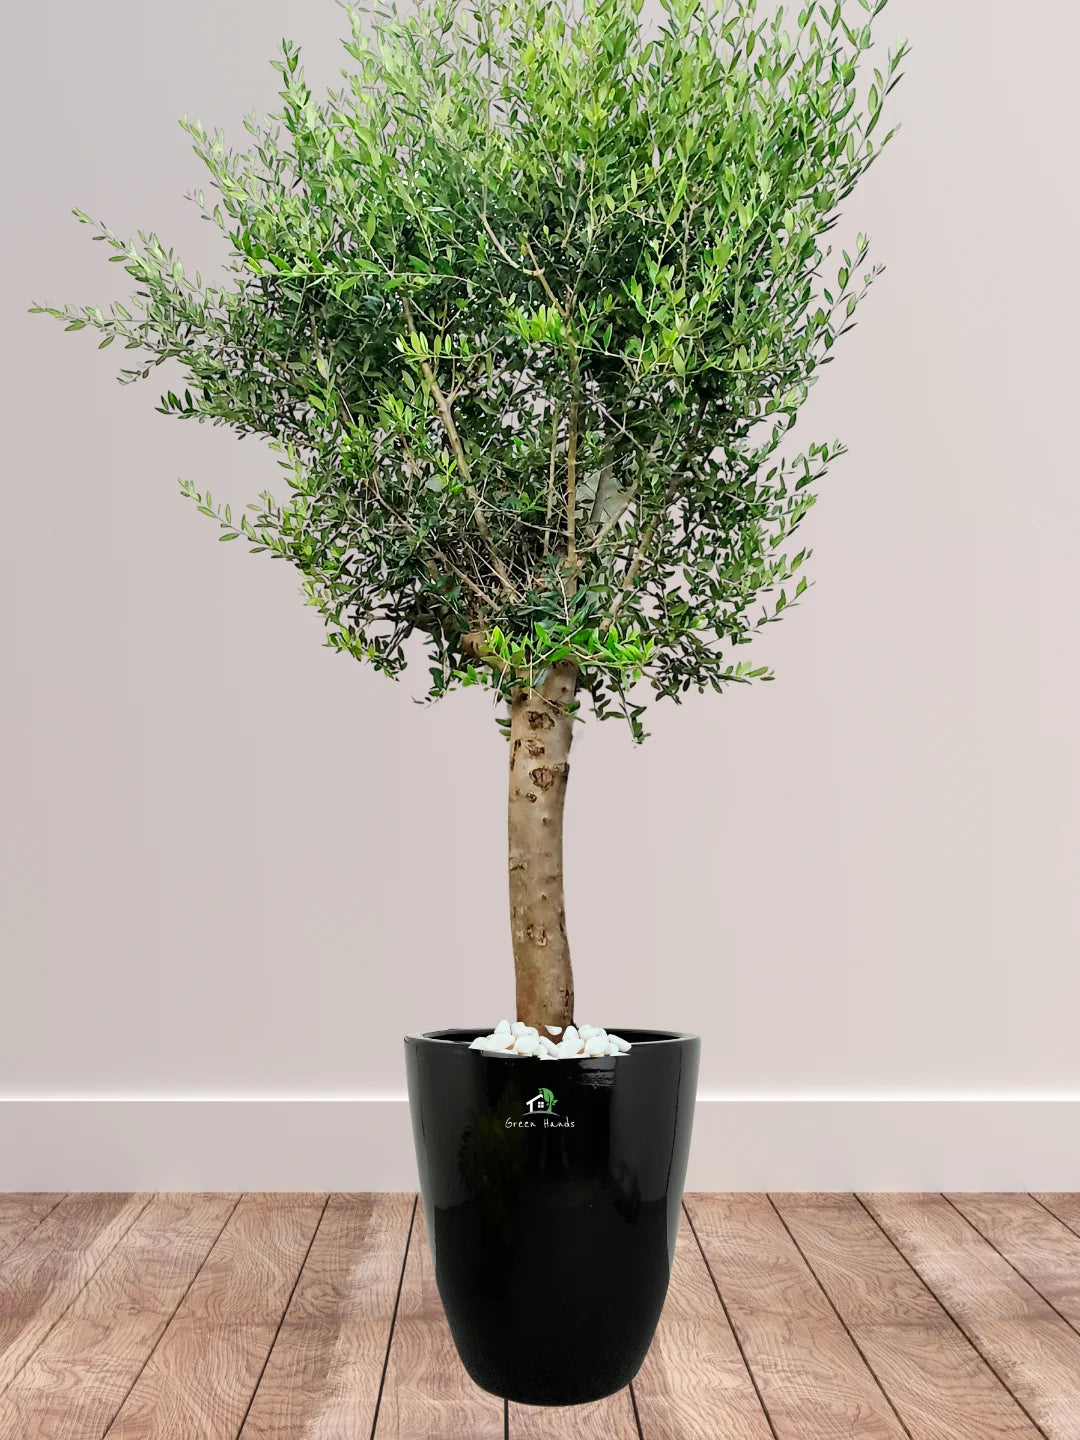 Potted Outdoor Olive Tree Planted in Heavy Ceramic Pot Pot